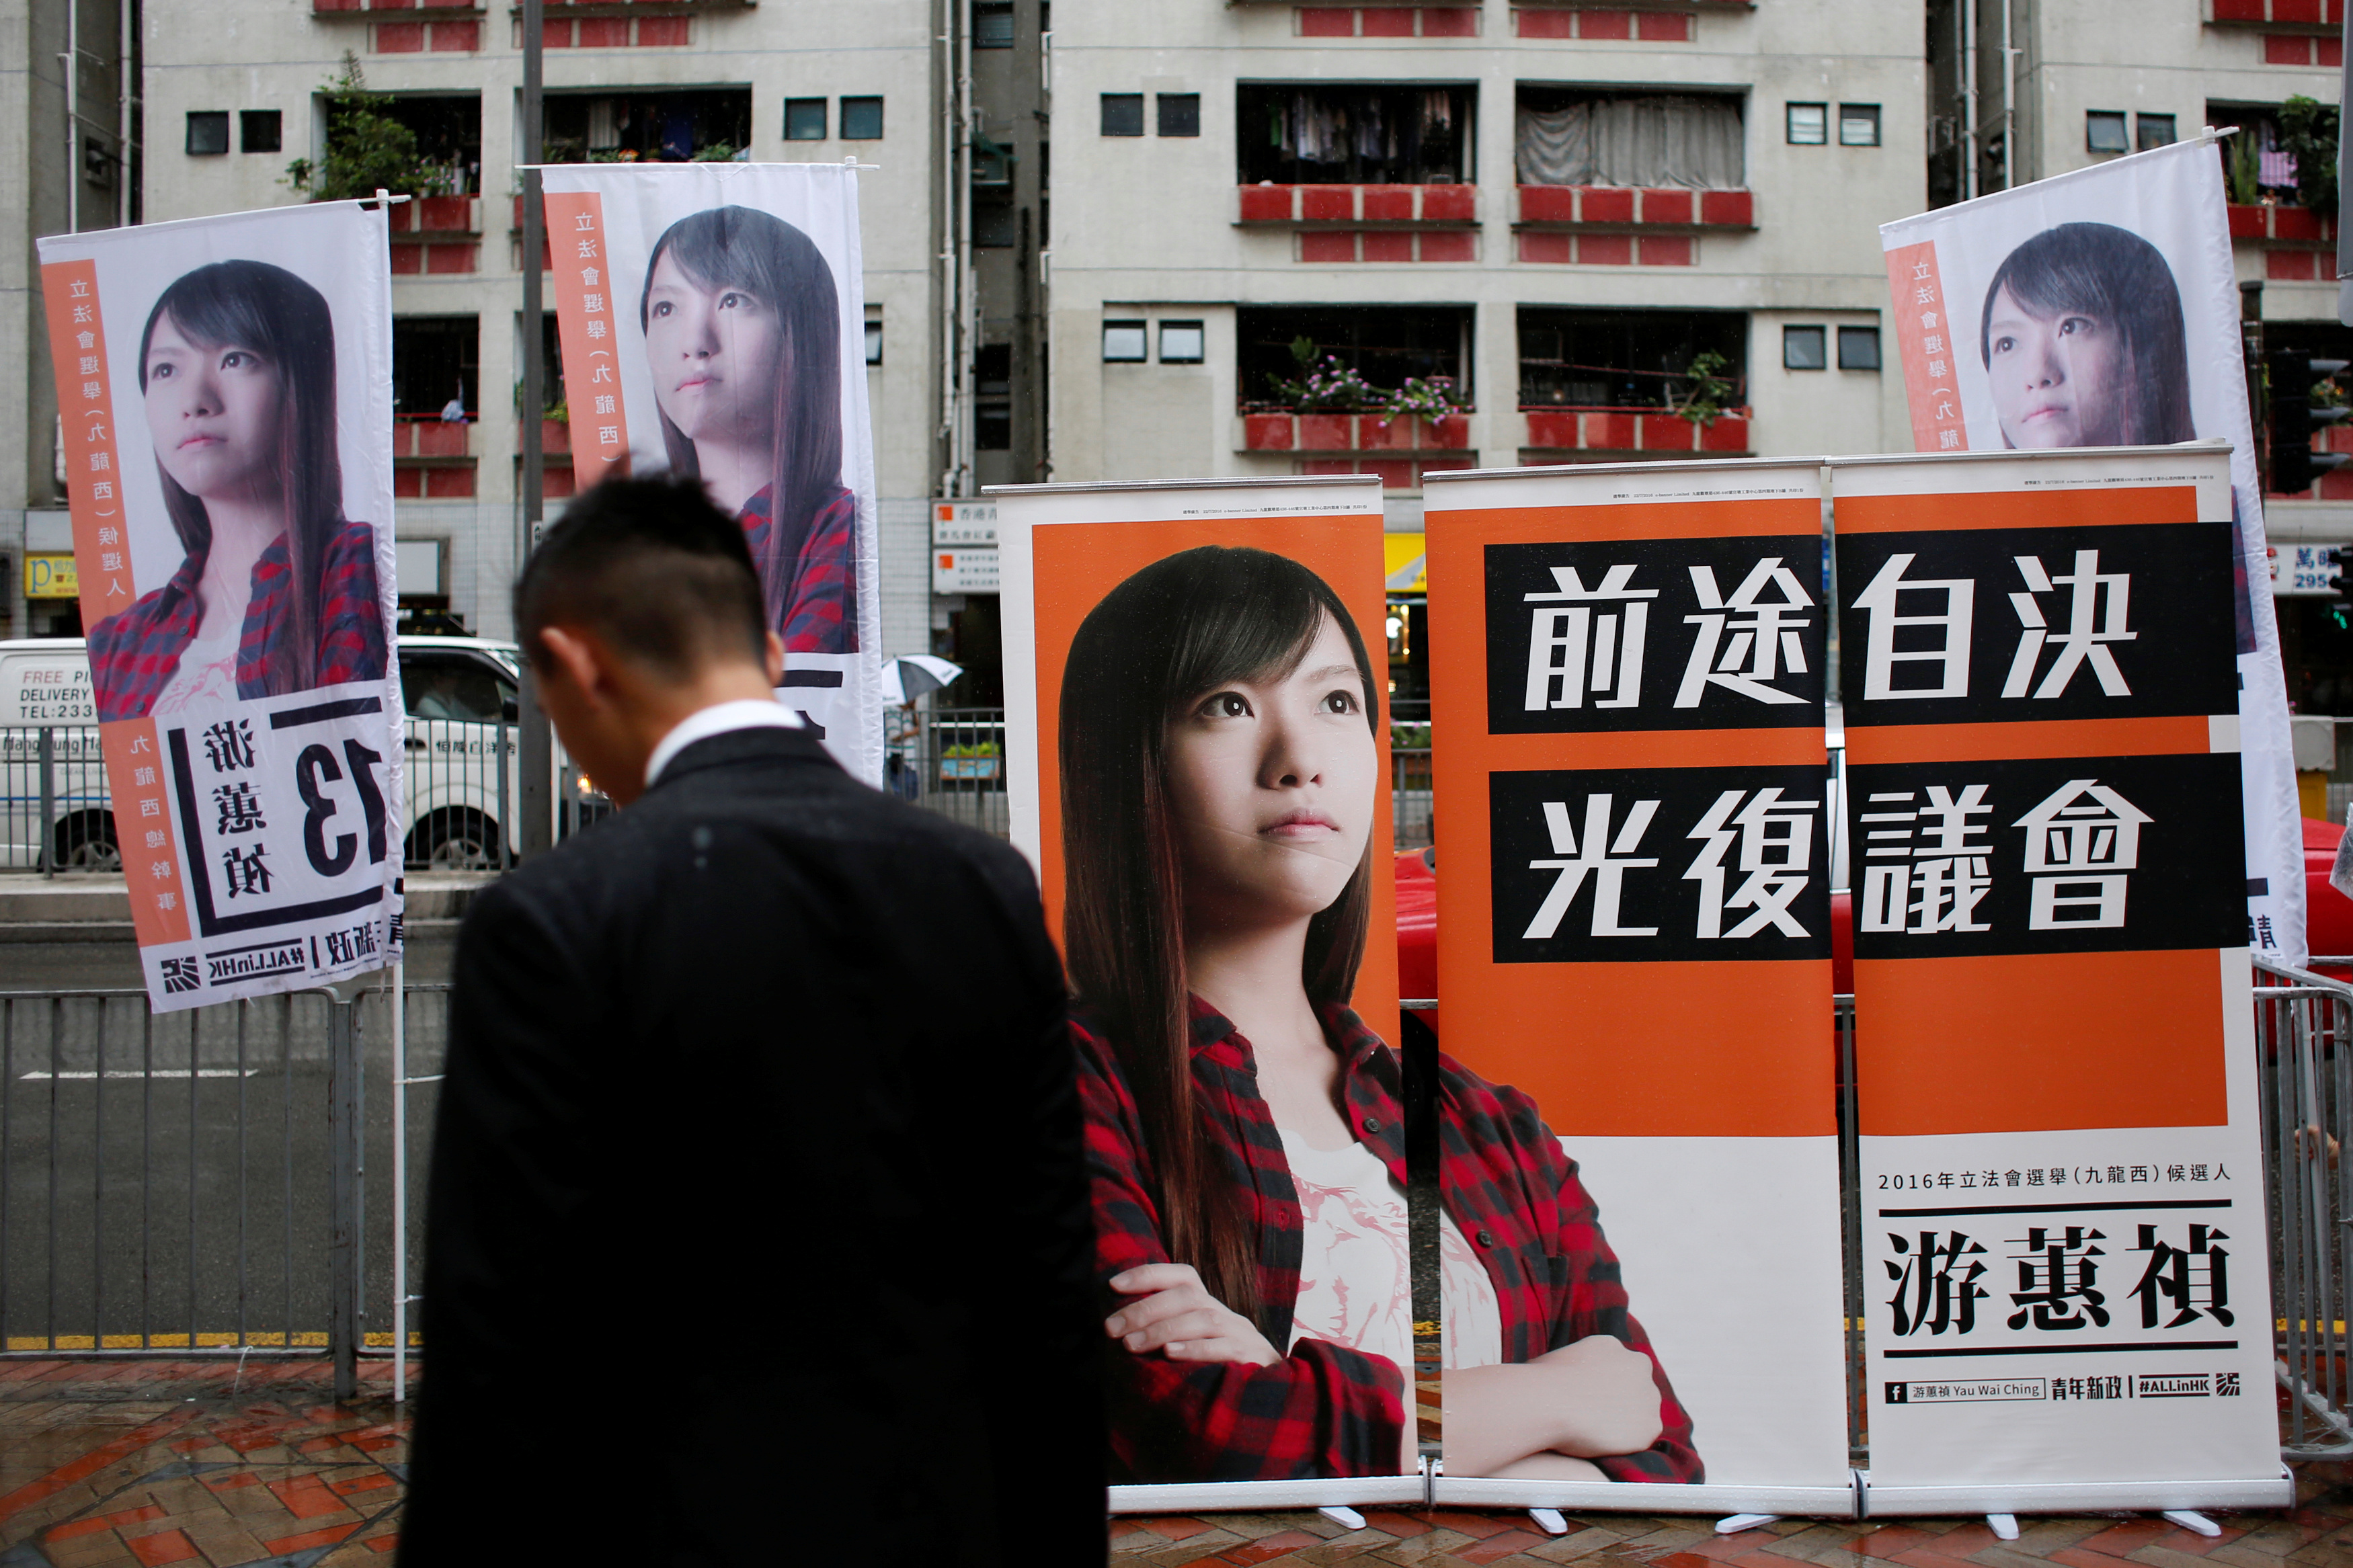 Campaign banners of Legislative Council election candidate Yau Wai-ching, member of political group Youngspiration, are displayed on a street in Hong Kong on Aug. 17, 2016 (Bobby Yip—Reuters)